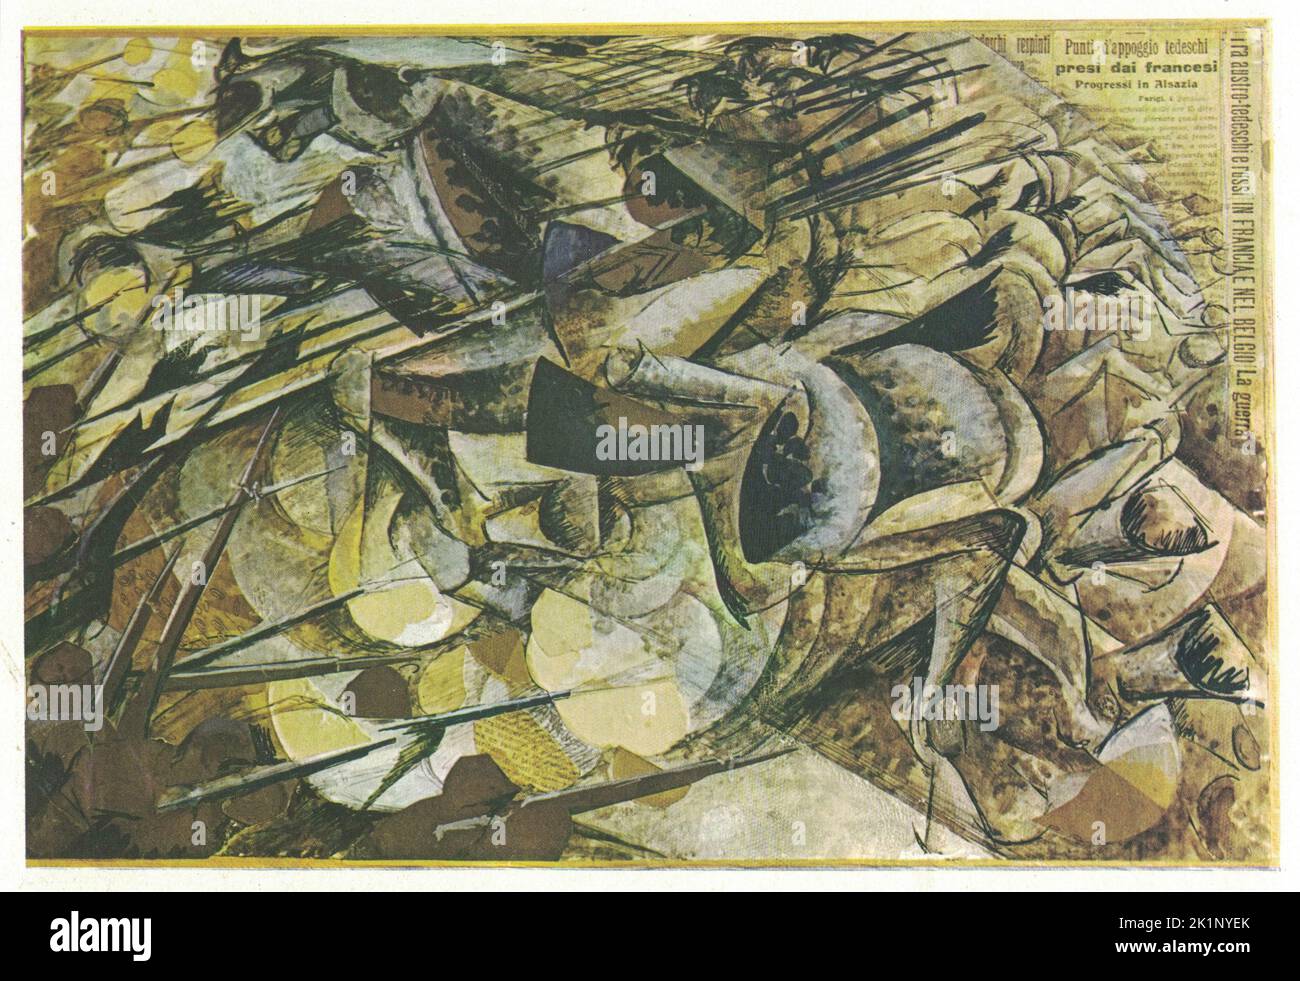 The Charge of the Lancers, 1915, collage, cardboard, tempera. The work by Umberto Boccioni. The Charge of the Lancers is the only known work by Boccioni that is devoted exclusively to the theme of war. Being a collage, Charge was also a rare departure for the artist in terms of medium. In previous works, Boccioni had used the figure of the horse as a symbol for work, but in this collage the horse becomes a symbol of war and natural strength, since it appears to be overcoming a horde of German bayonets. If, in fact, Boccioni was establishing the brute strength of the horse over man-made weapons Stock Photo